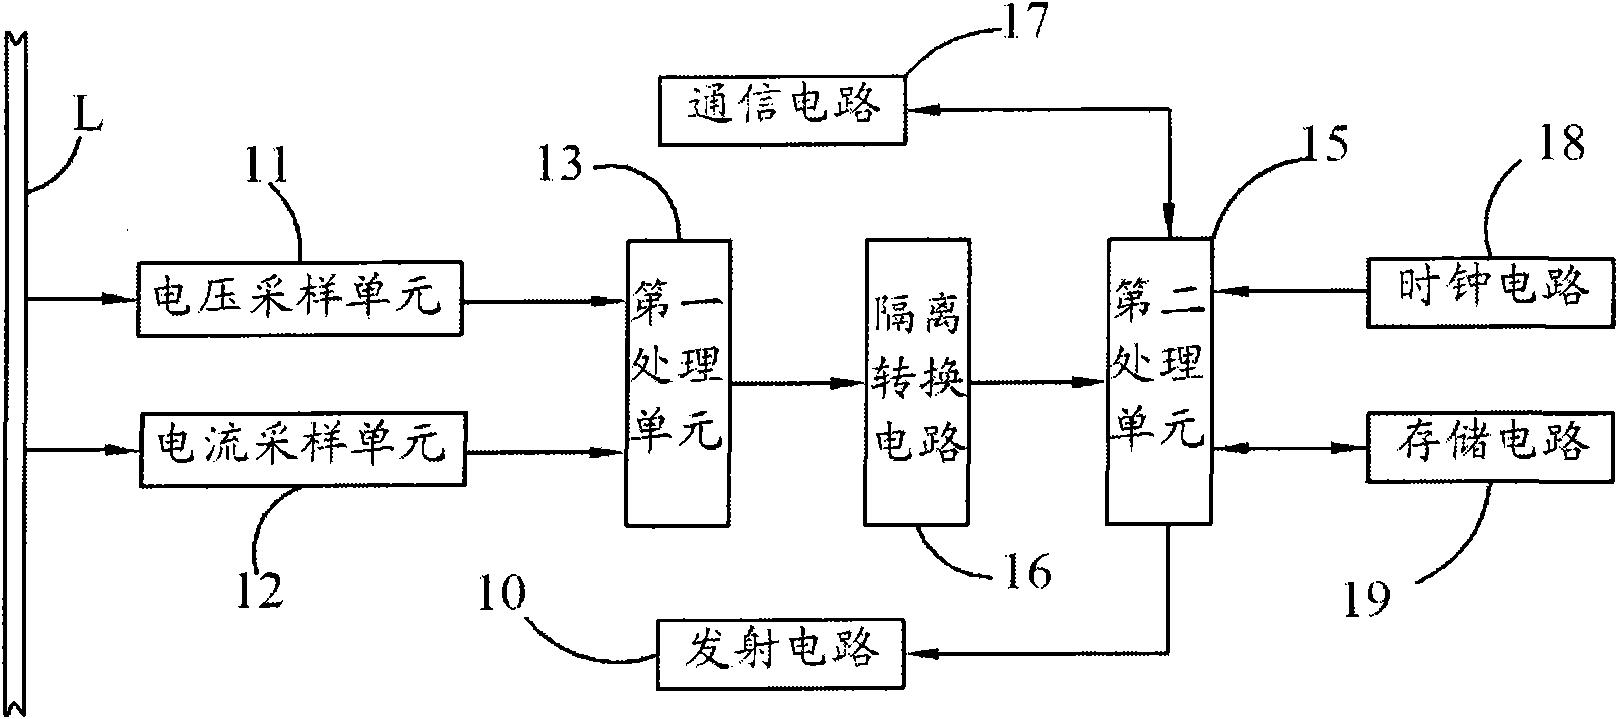 High-voltage direct metering device